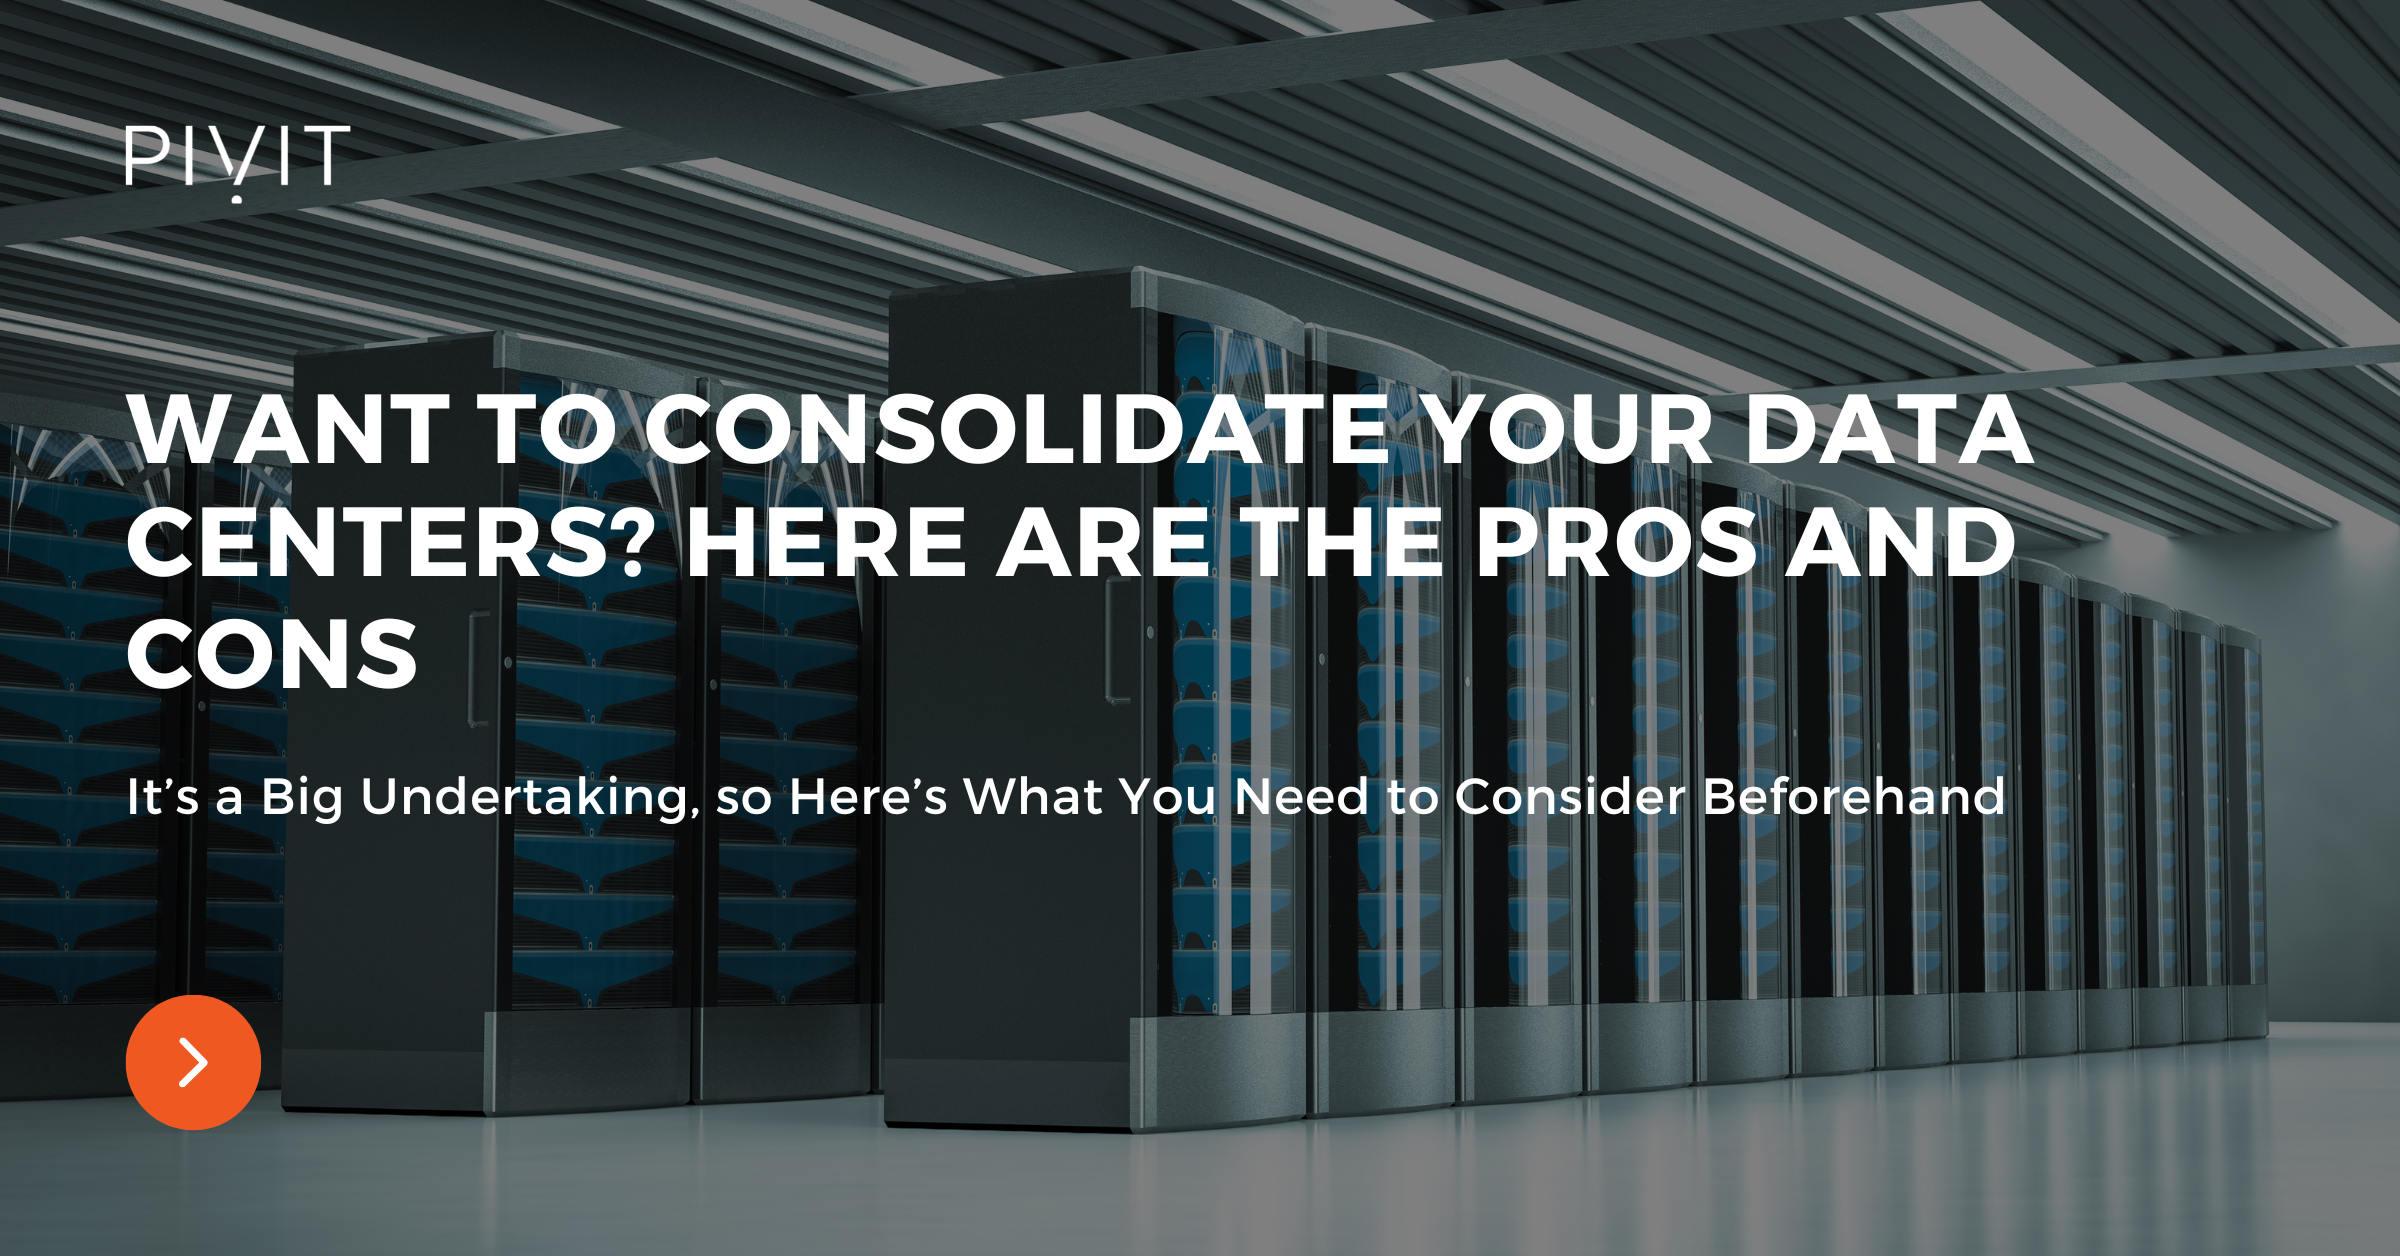 Want to Consolidate Your Data Centers? Here Are the Pros and Cons